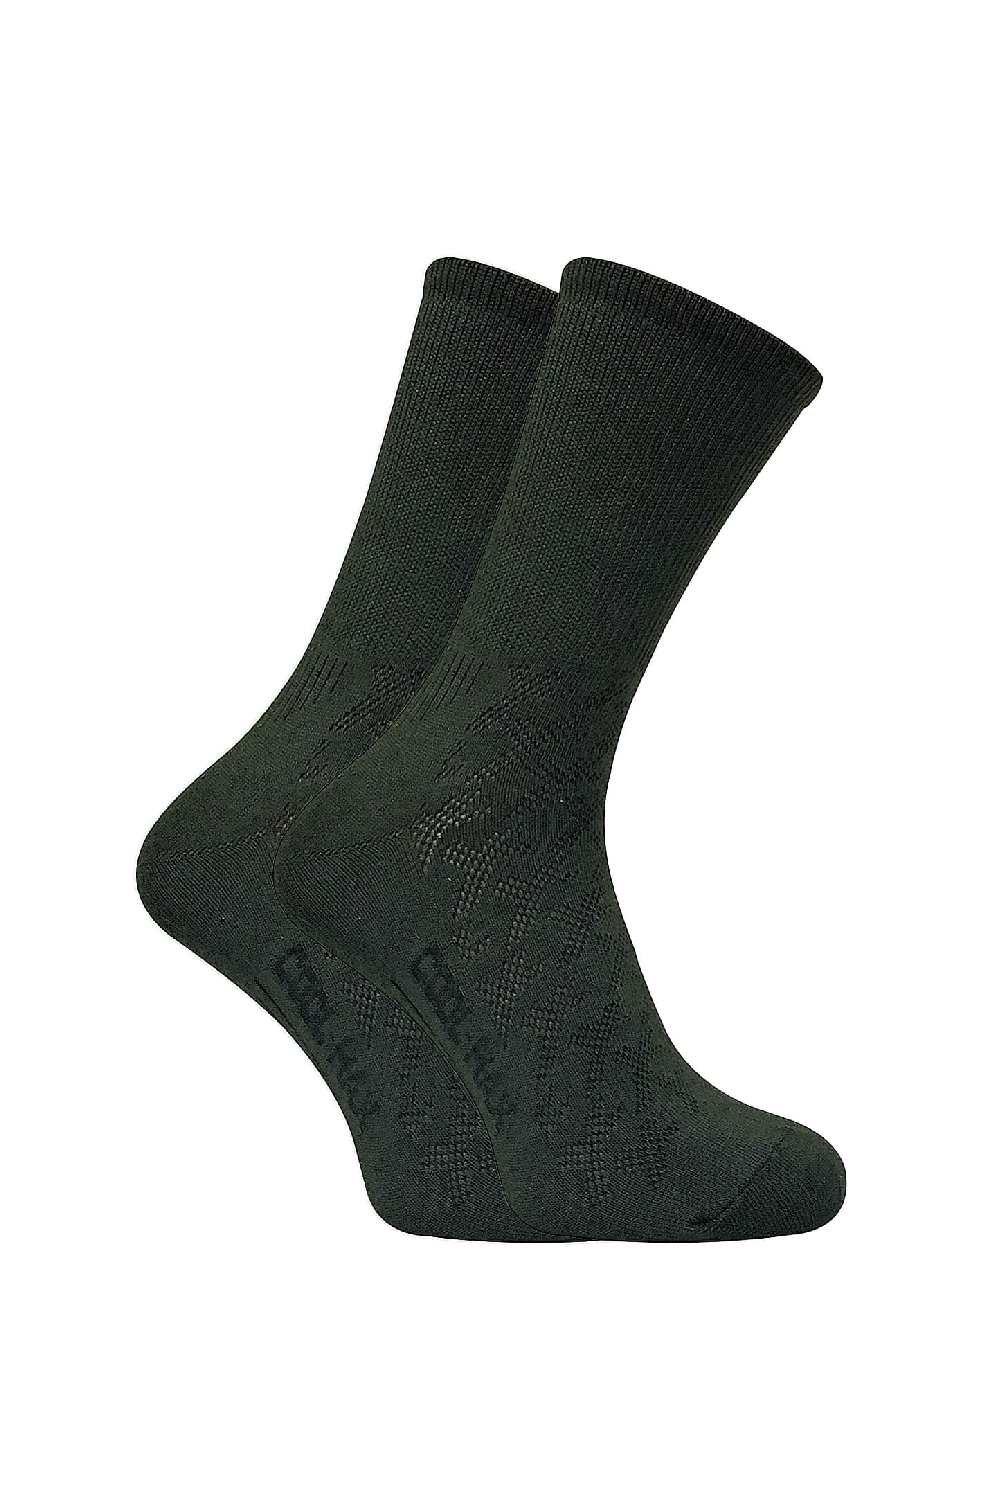 2 Pairs Coolmax Lightweight Hiking Socks for Walking Boots